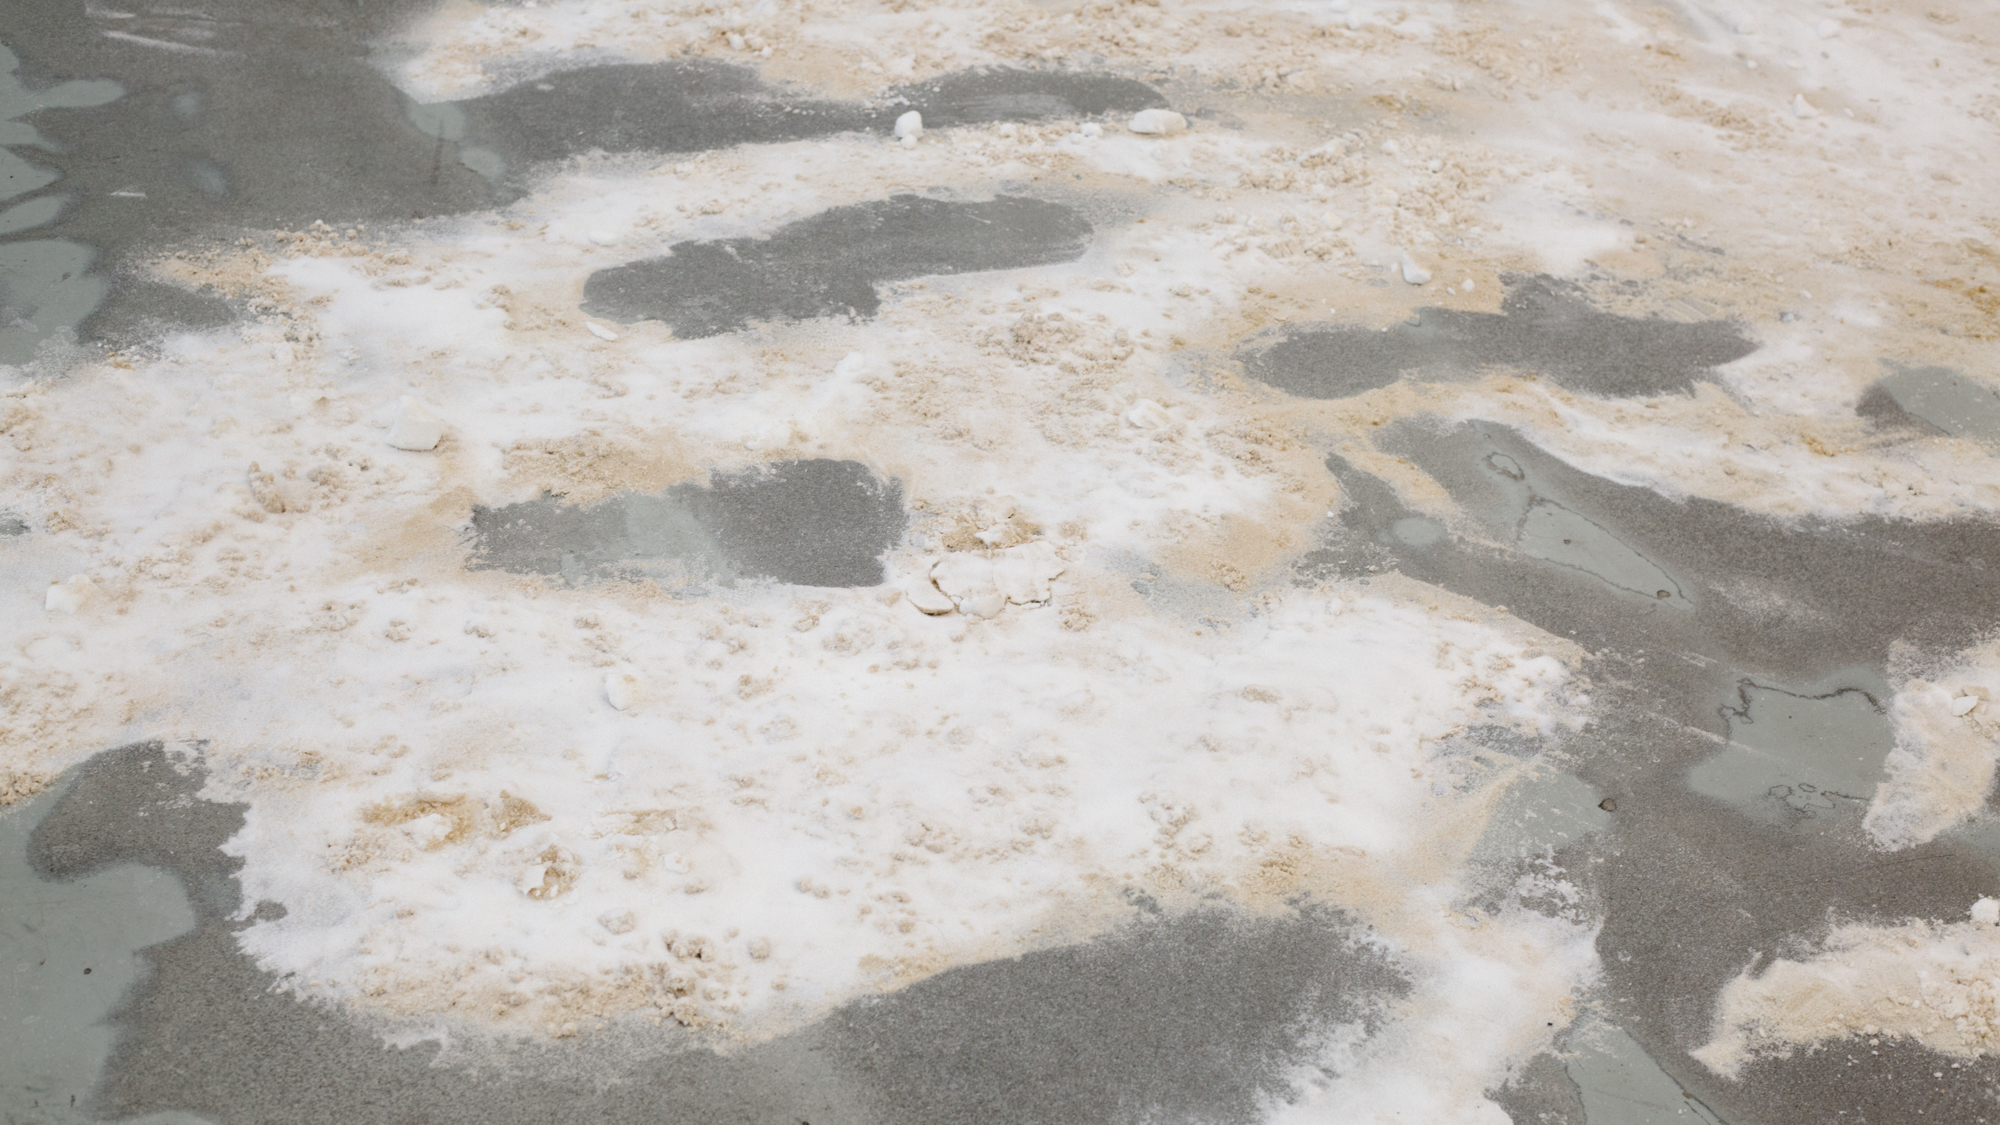 salt mixed with sand in organic shapes on a concrete floor